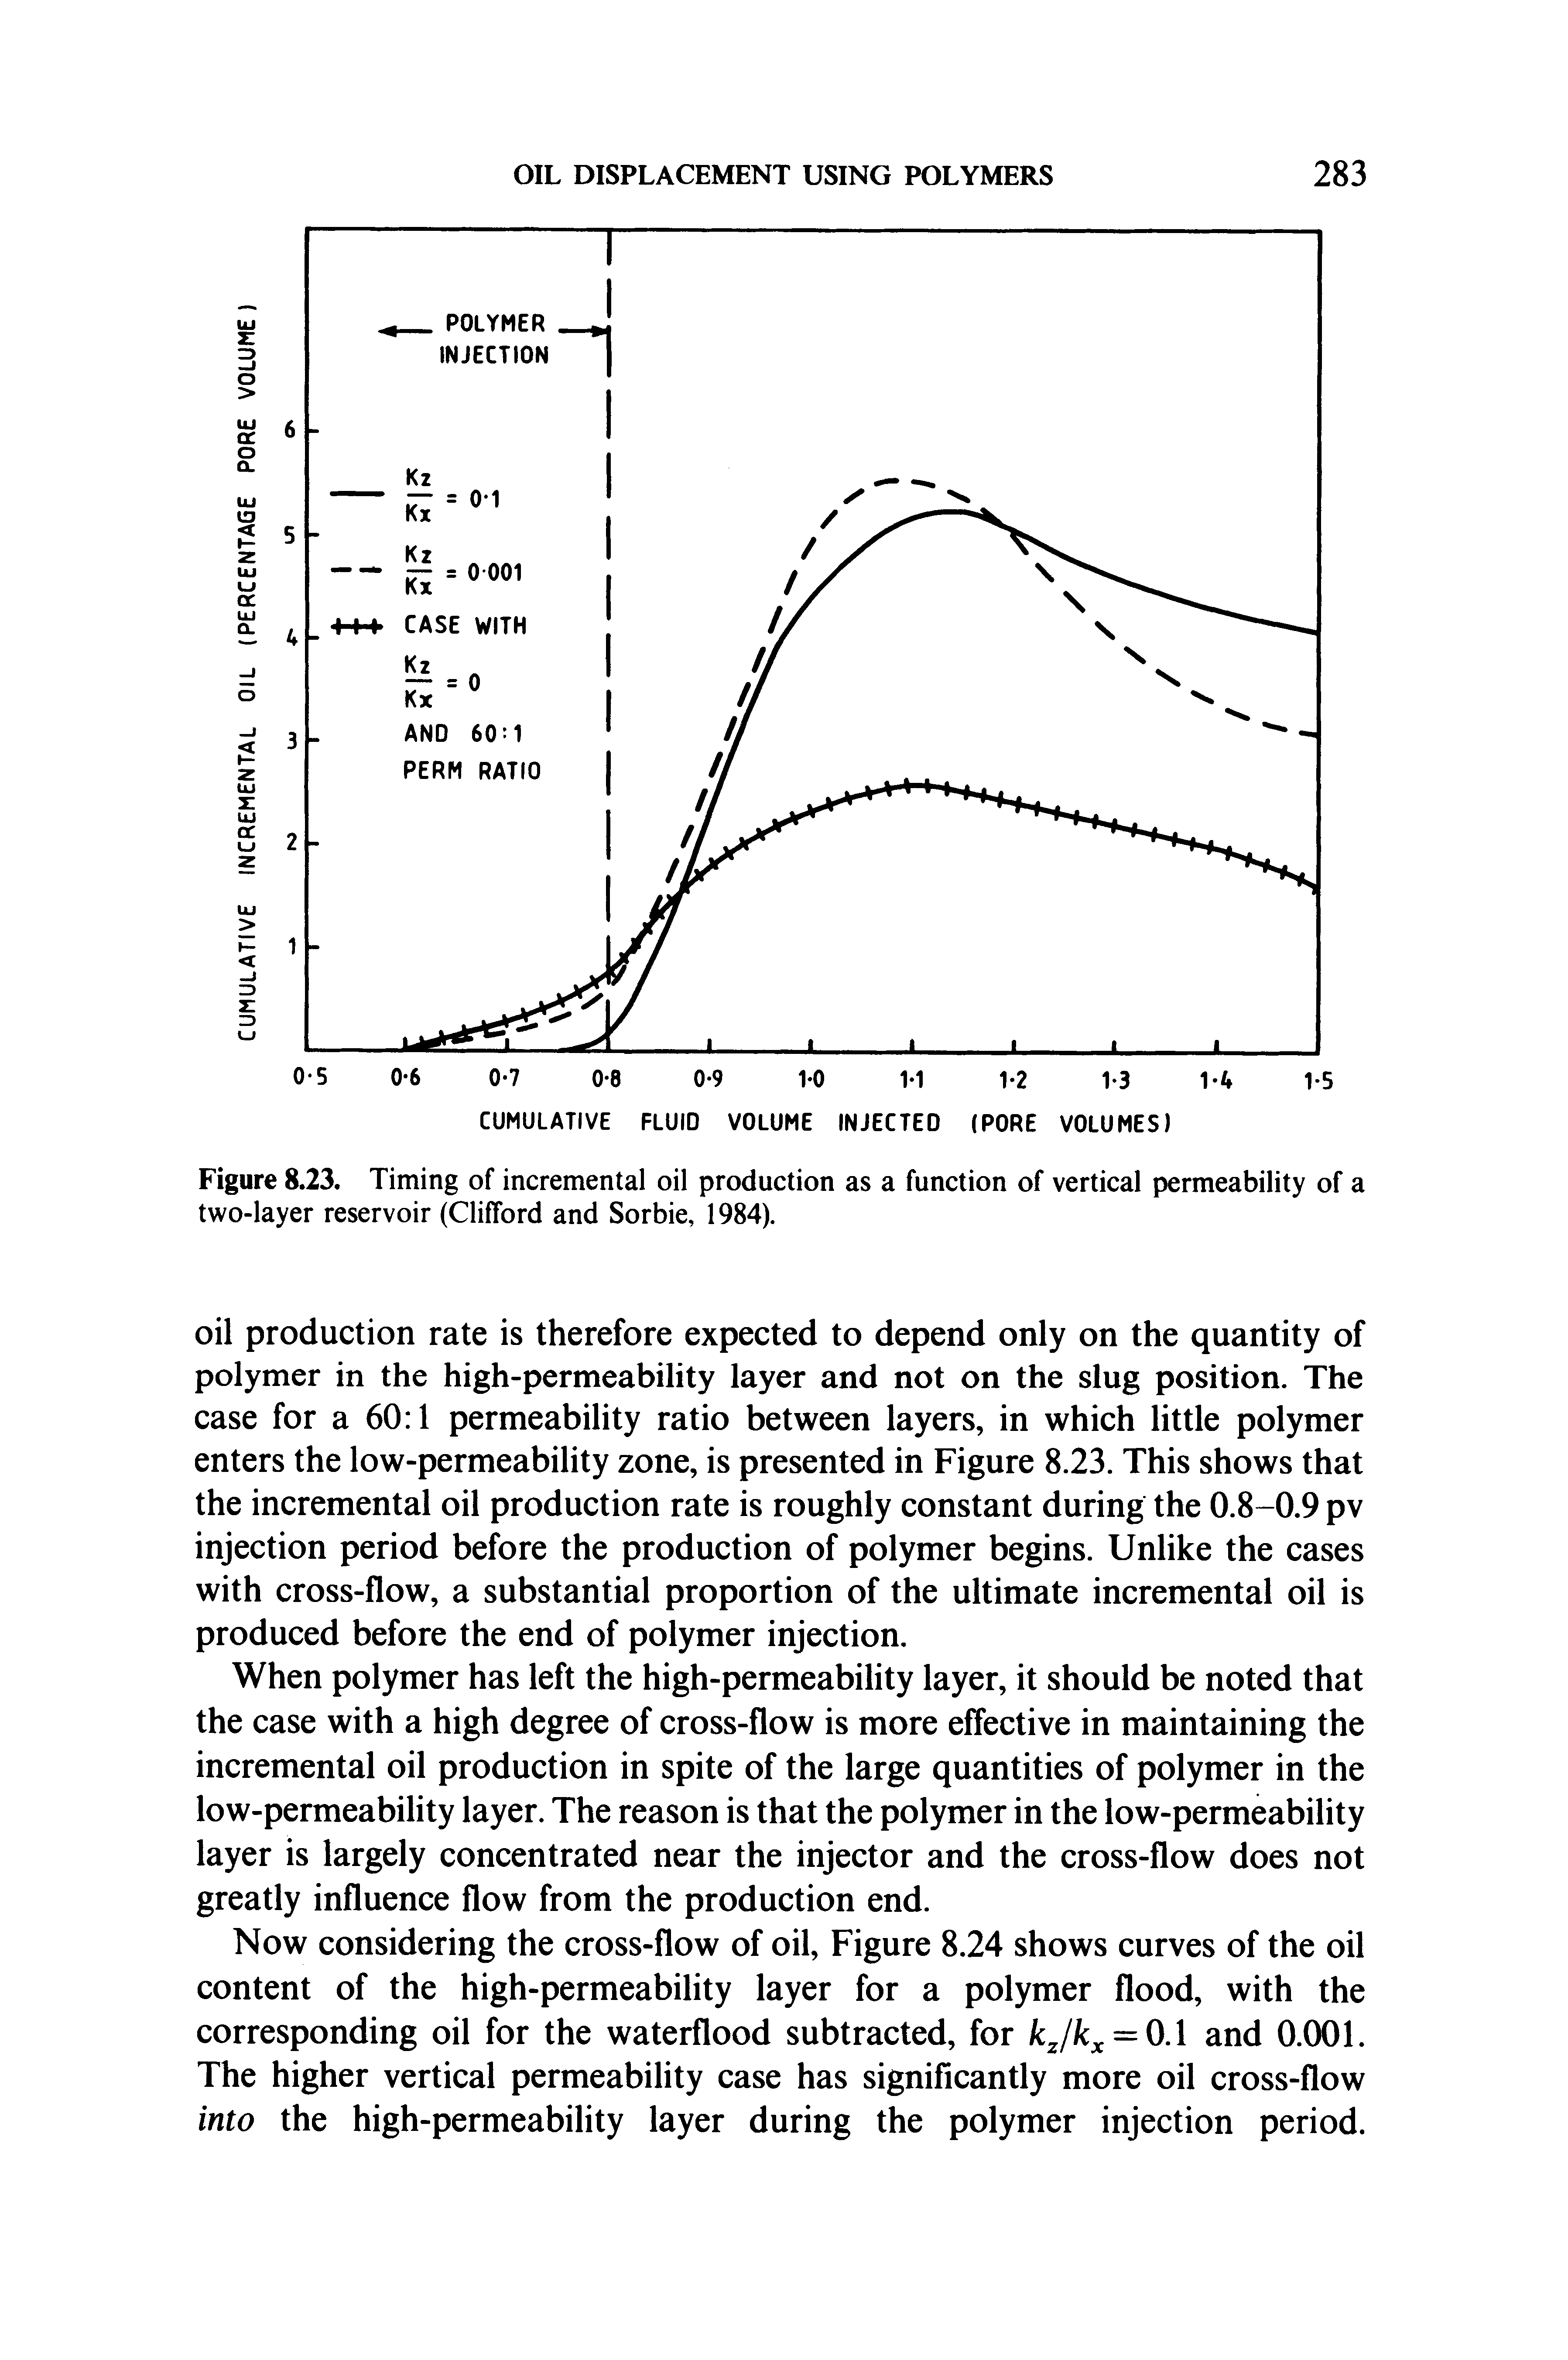 Figure 8.23. Timing of incremental oil production as a function of vertical permeability of a two-layer reservoir (Clifford and Sorbie, 1984).